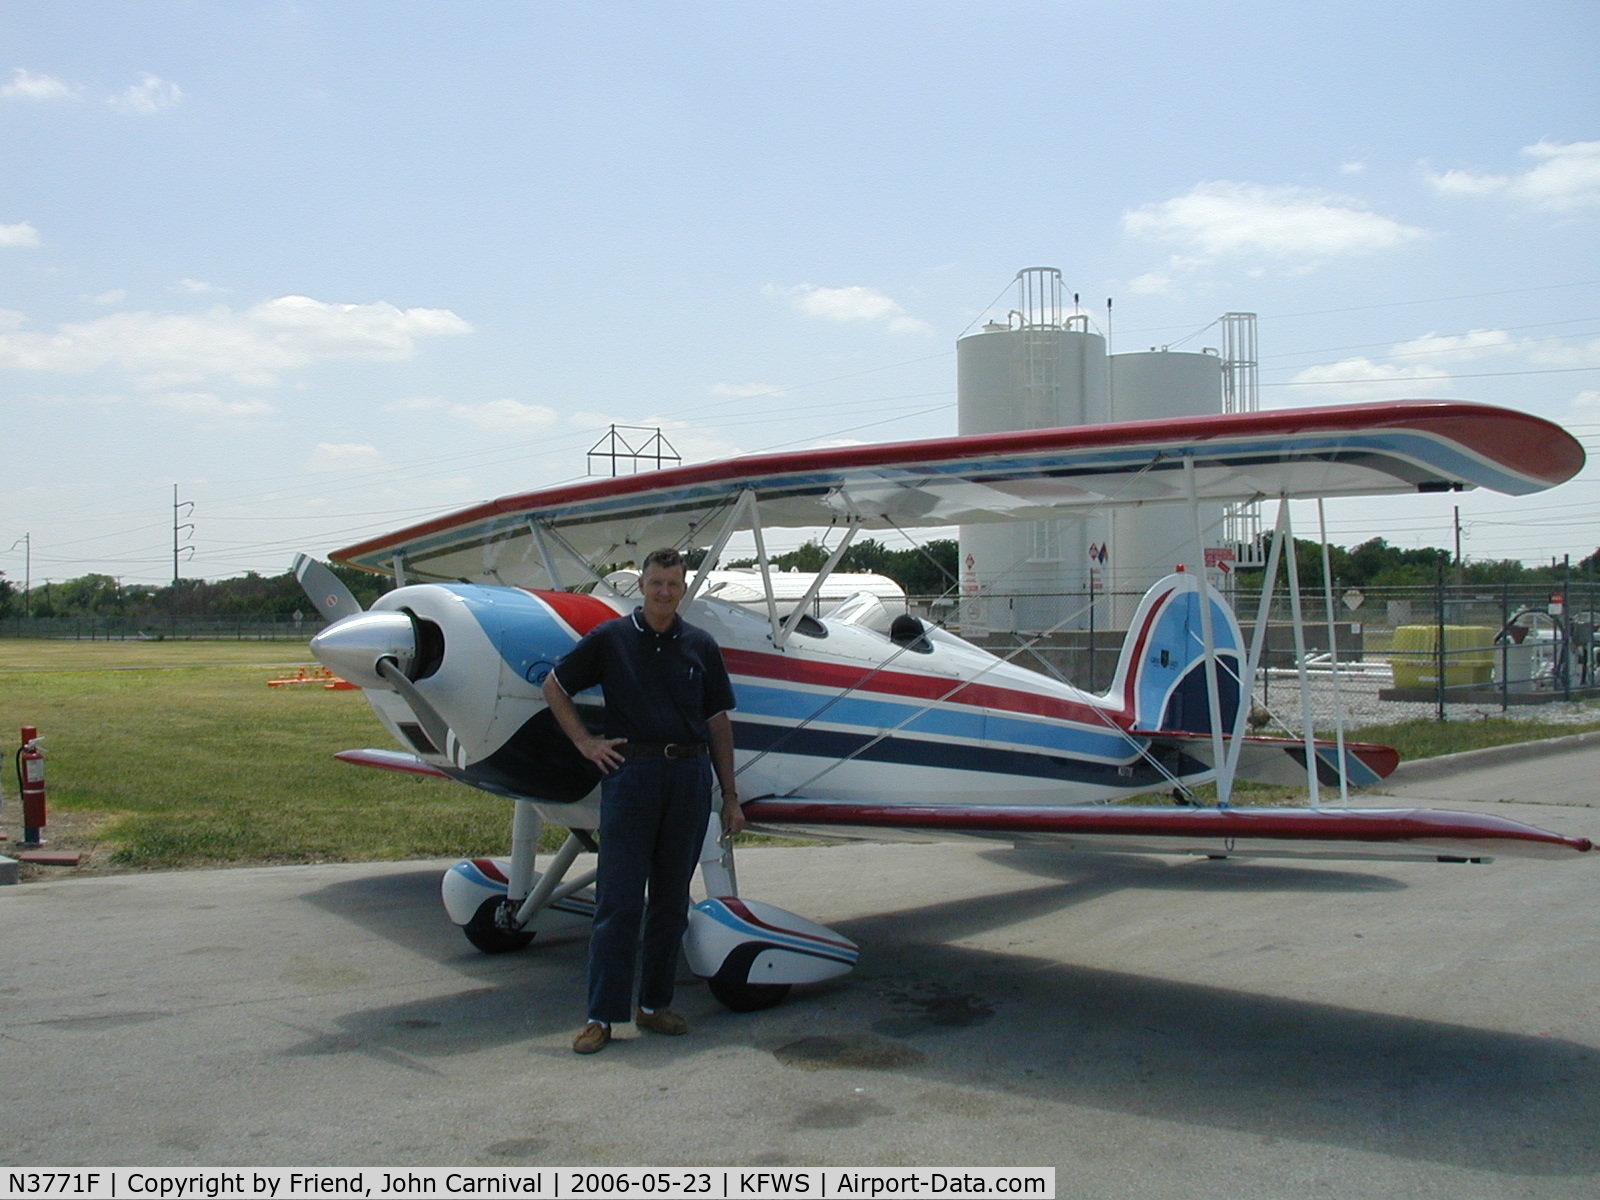 N3771F, 1977 Great Lakes 2T-1A-2 Sport Trainer C/N 0764, Roger Black in front of his Great Lakes after fueling.